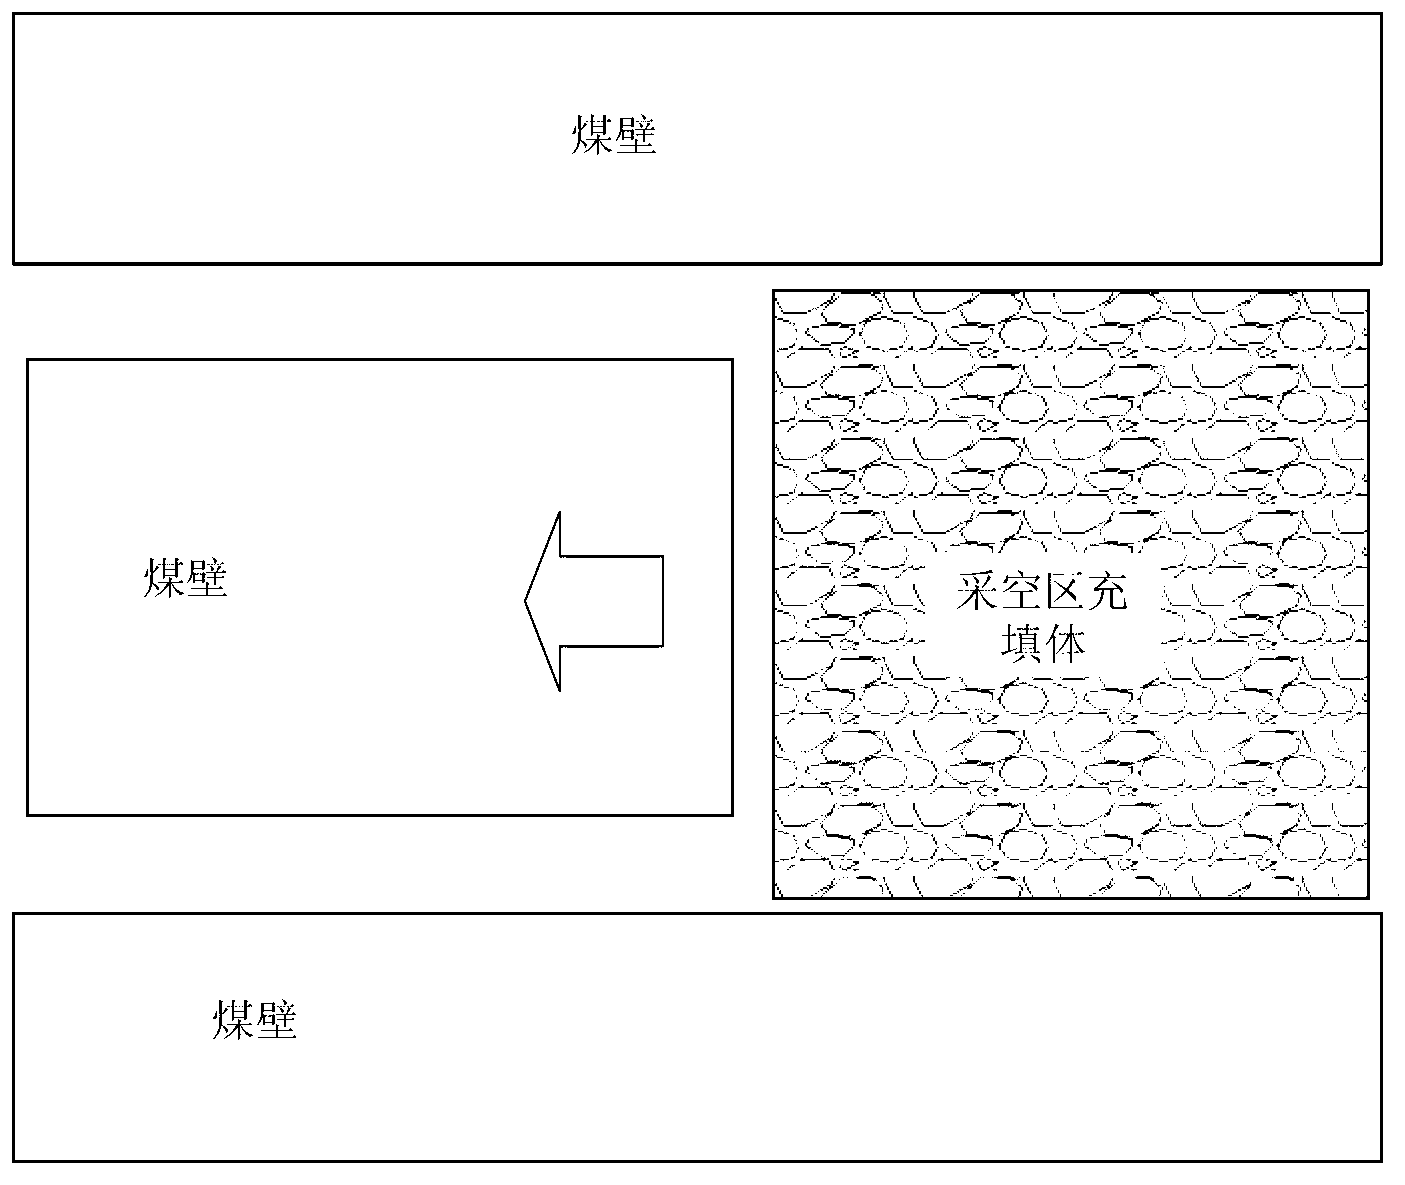 Method for actively controlling motion of coal mine critical layers by using strip filling walls